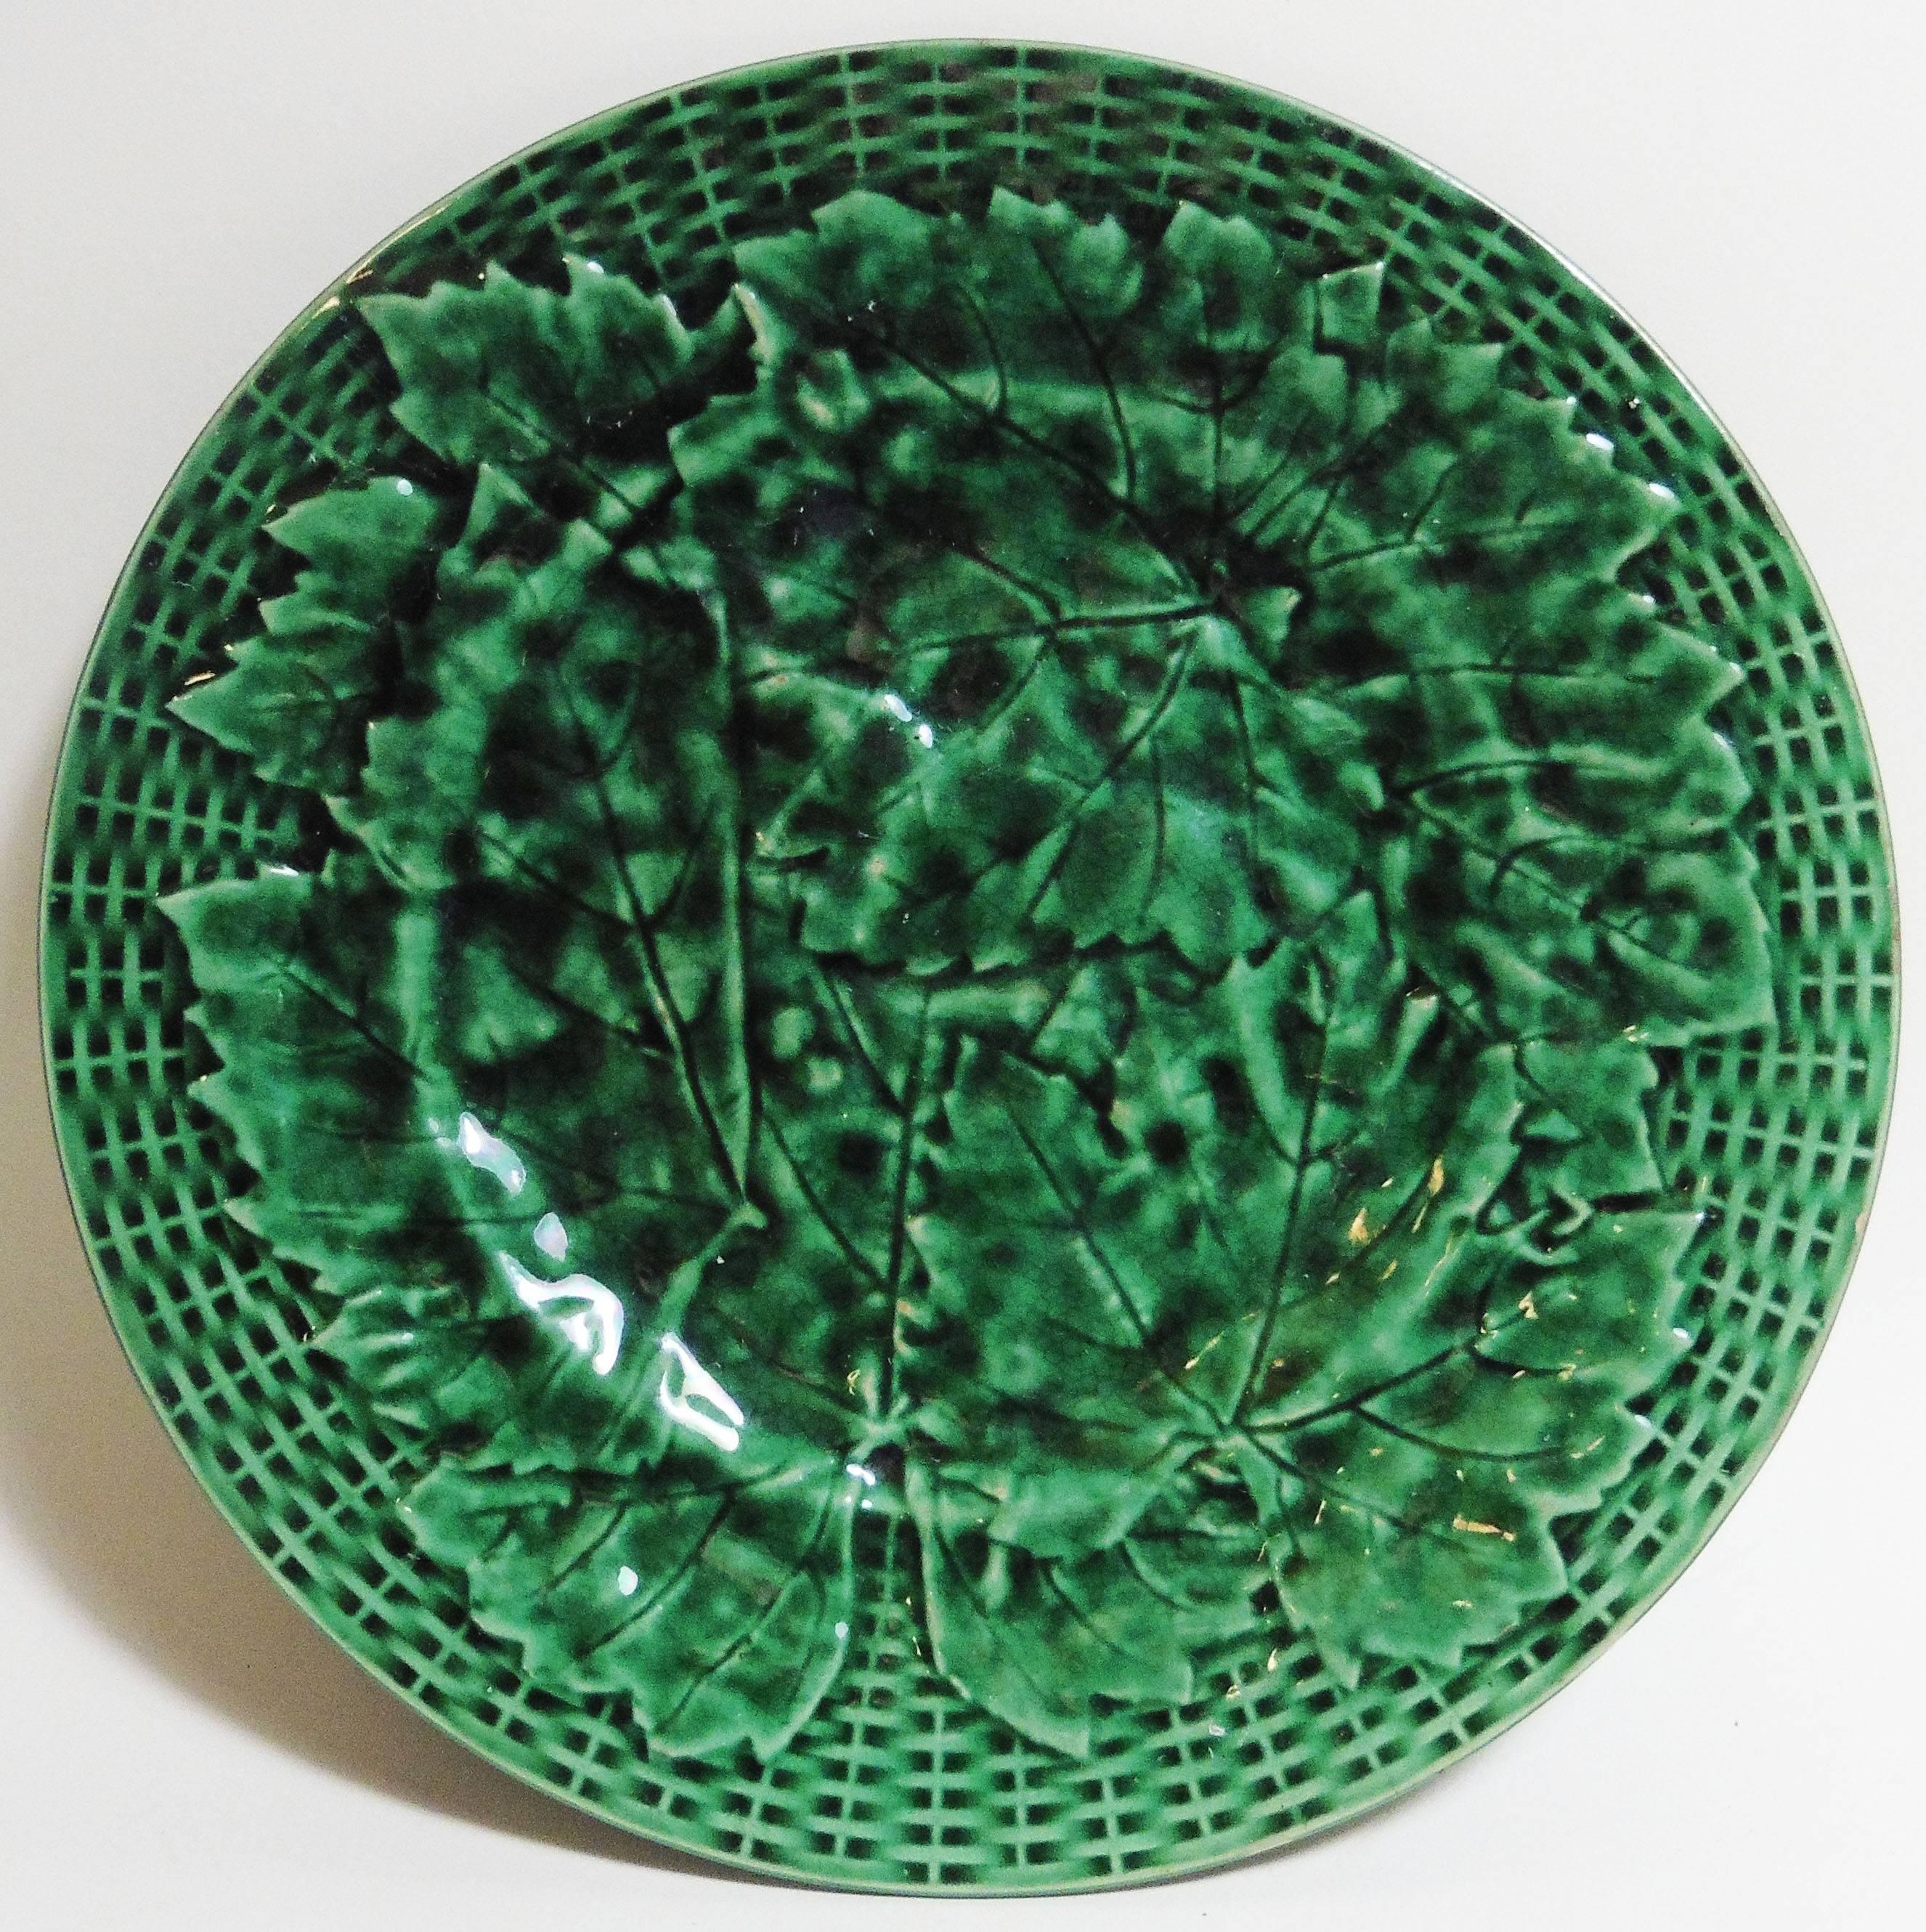 Pair of English Majolica green plates with leaves on a basket weave background, circa 1880.